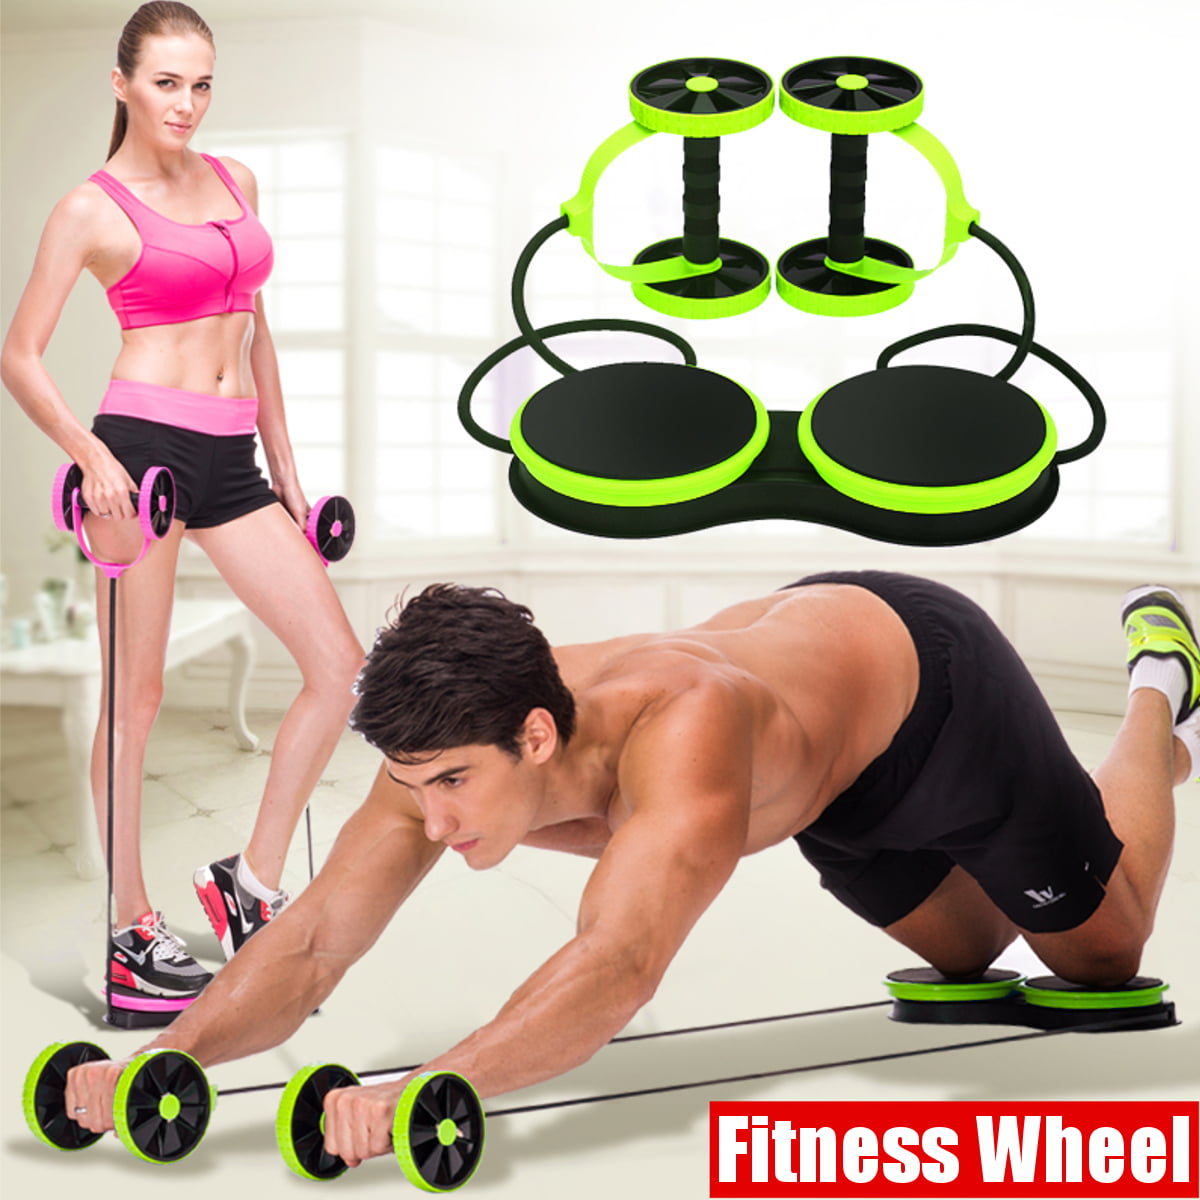 Dual AB Whell Roller Exercise Equipment Abdominal Workout Sport Fitness Gym New 